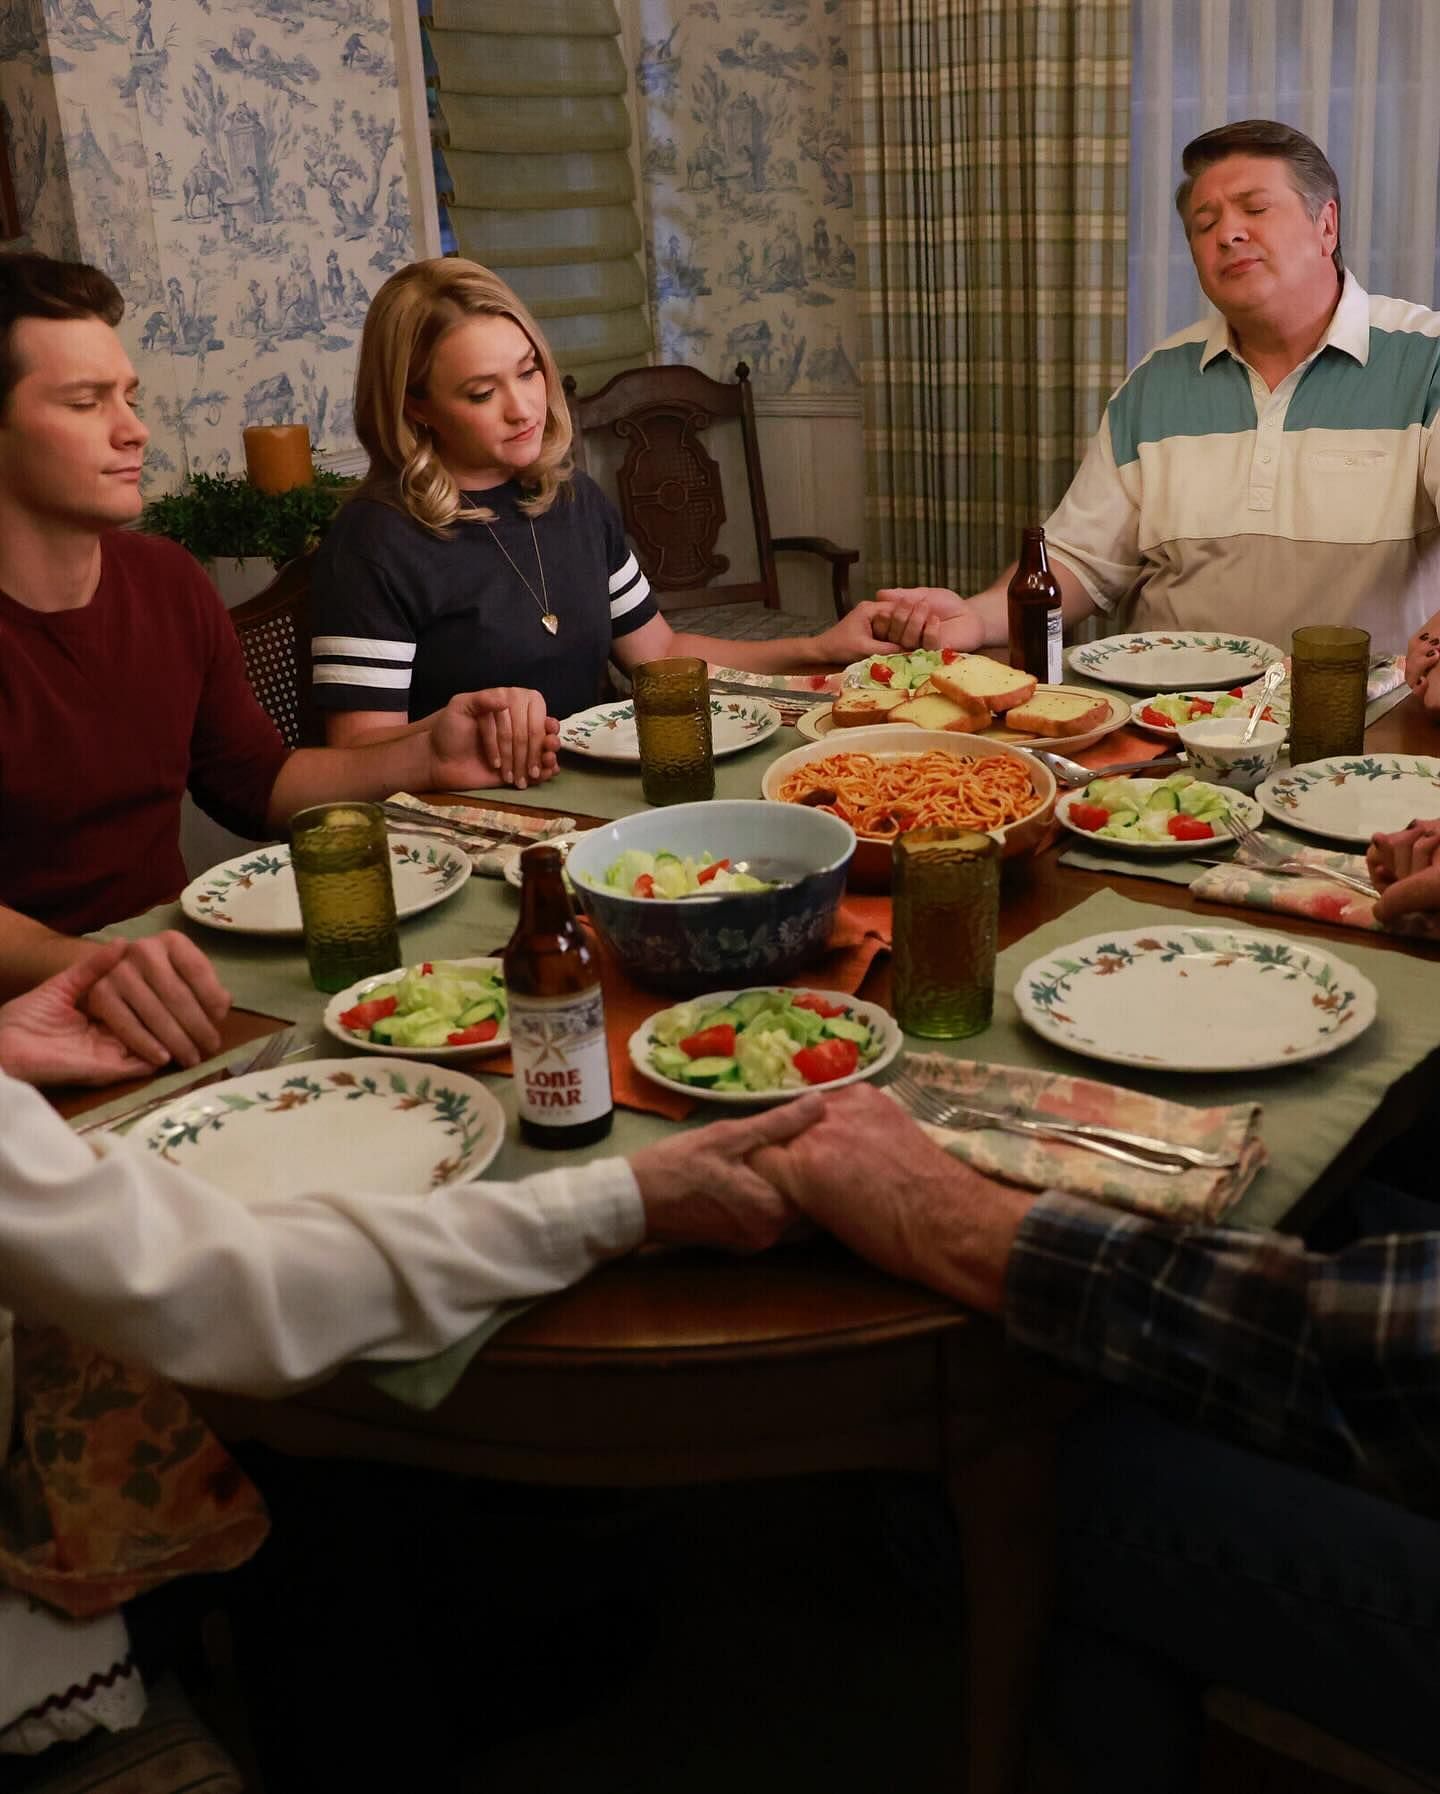 George Cooper seen with Georgie and Mandy at the dinner table (Image Via Twitter/@Young Sheldon)